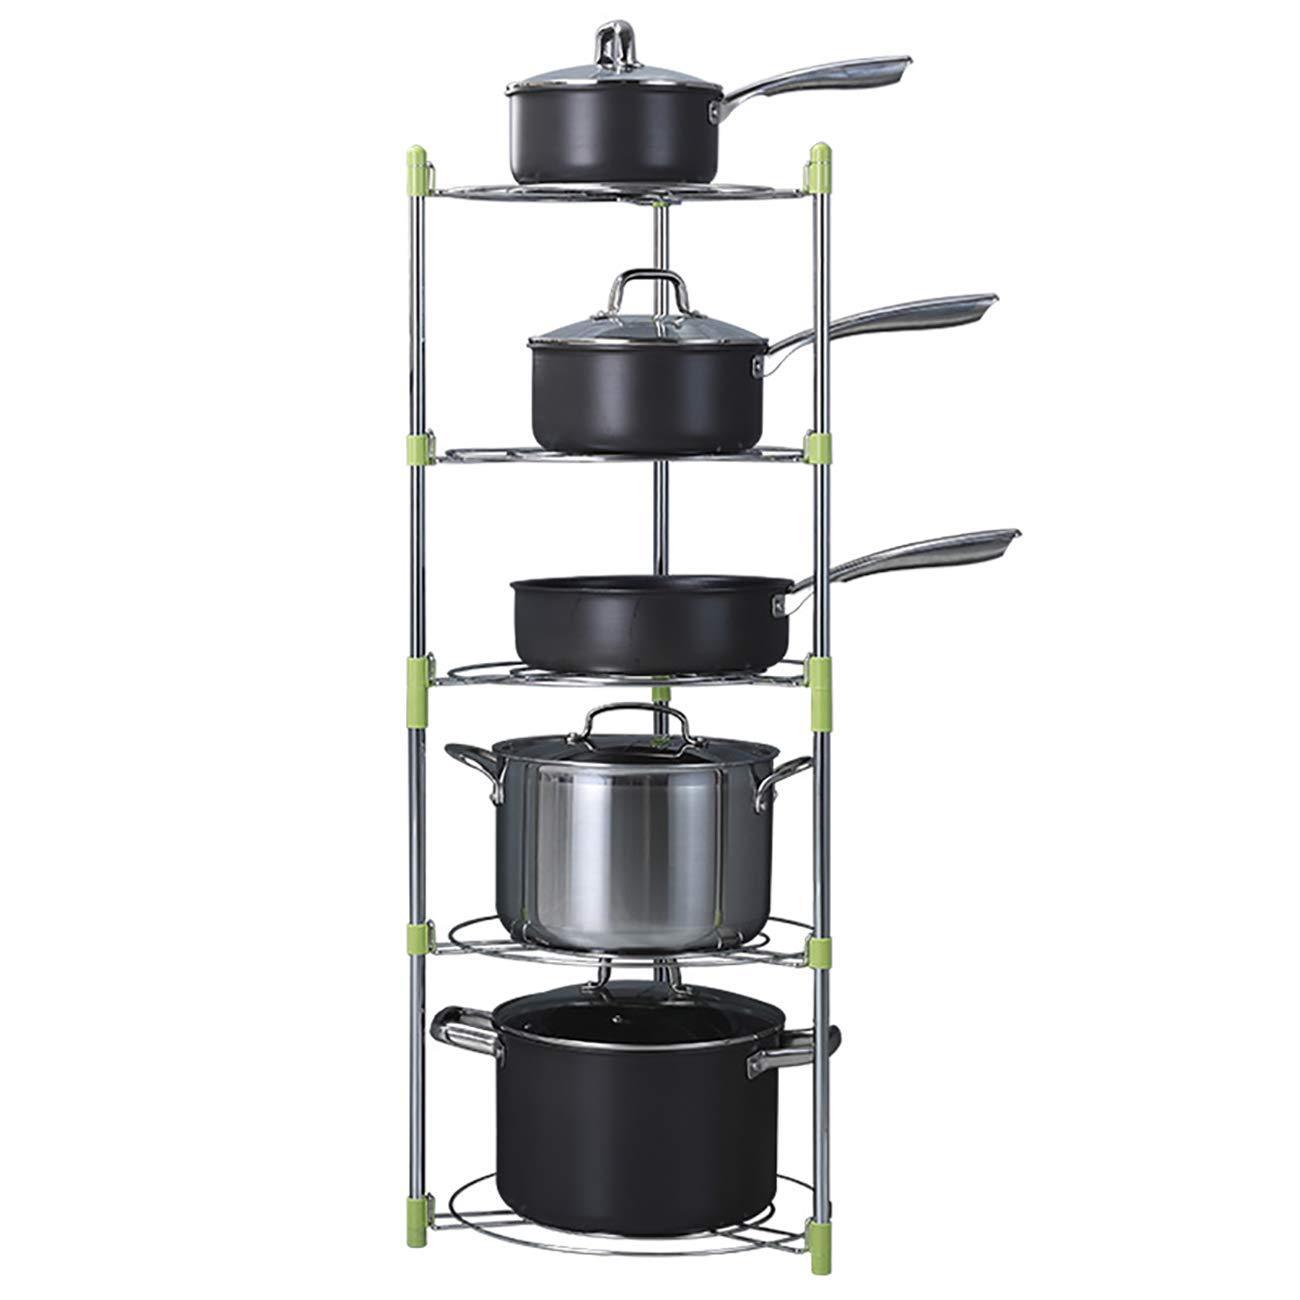 Online shopping uheng 5 tier adjustable kitchen cabinet pantry pan and pot lid organizer rack holder houseware cookware holders storage stainless steel dia 13 7 x h 38 5